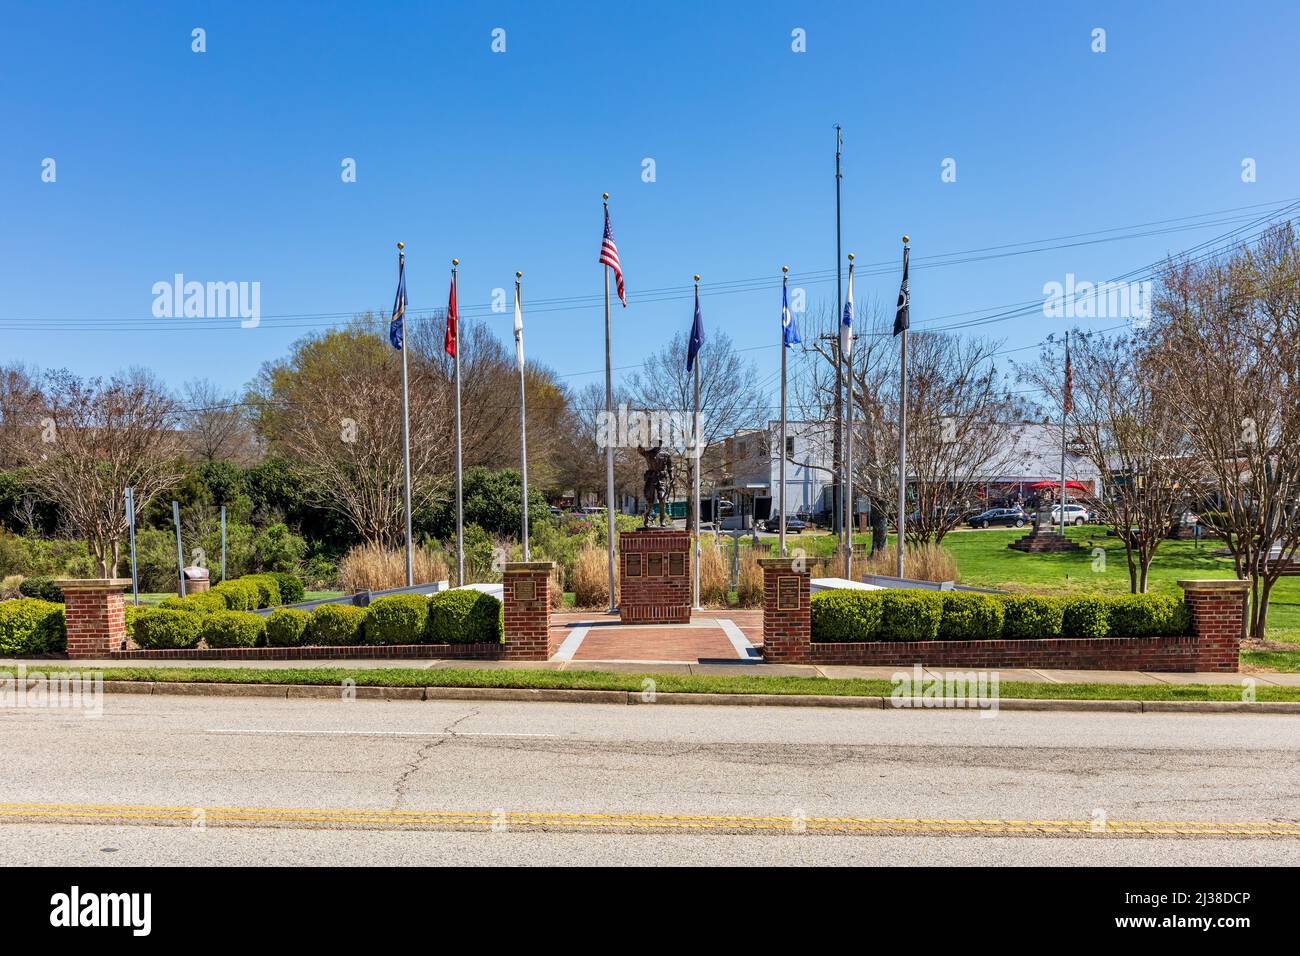 FORT MILL, S.C.-2 APRIL 22: Veterans Park in downtown, with monument and flag poles. Stock Photo